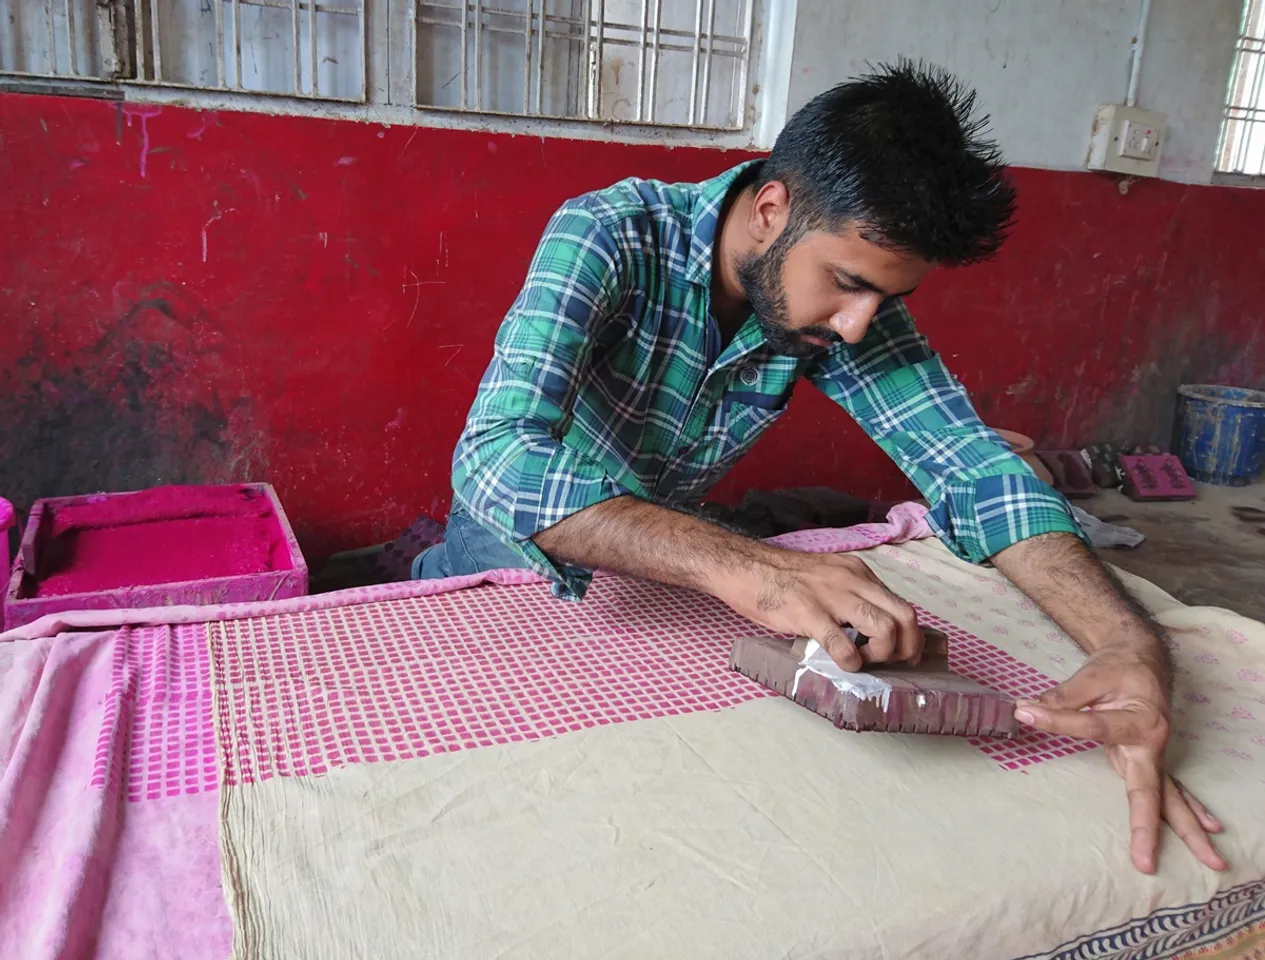 Hand block printing goes back to the 12th century in India. Pic: Muhammad Bilal Khatri